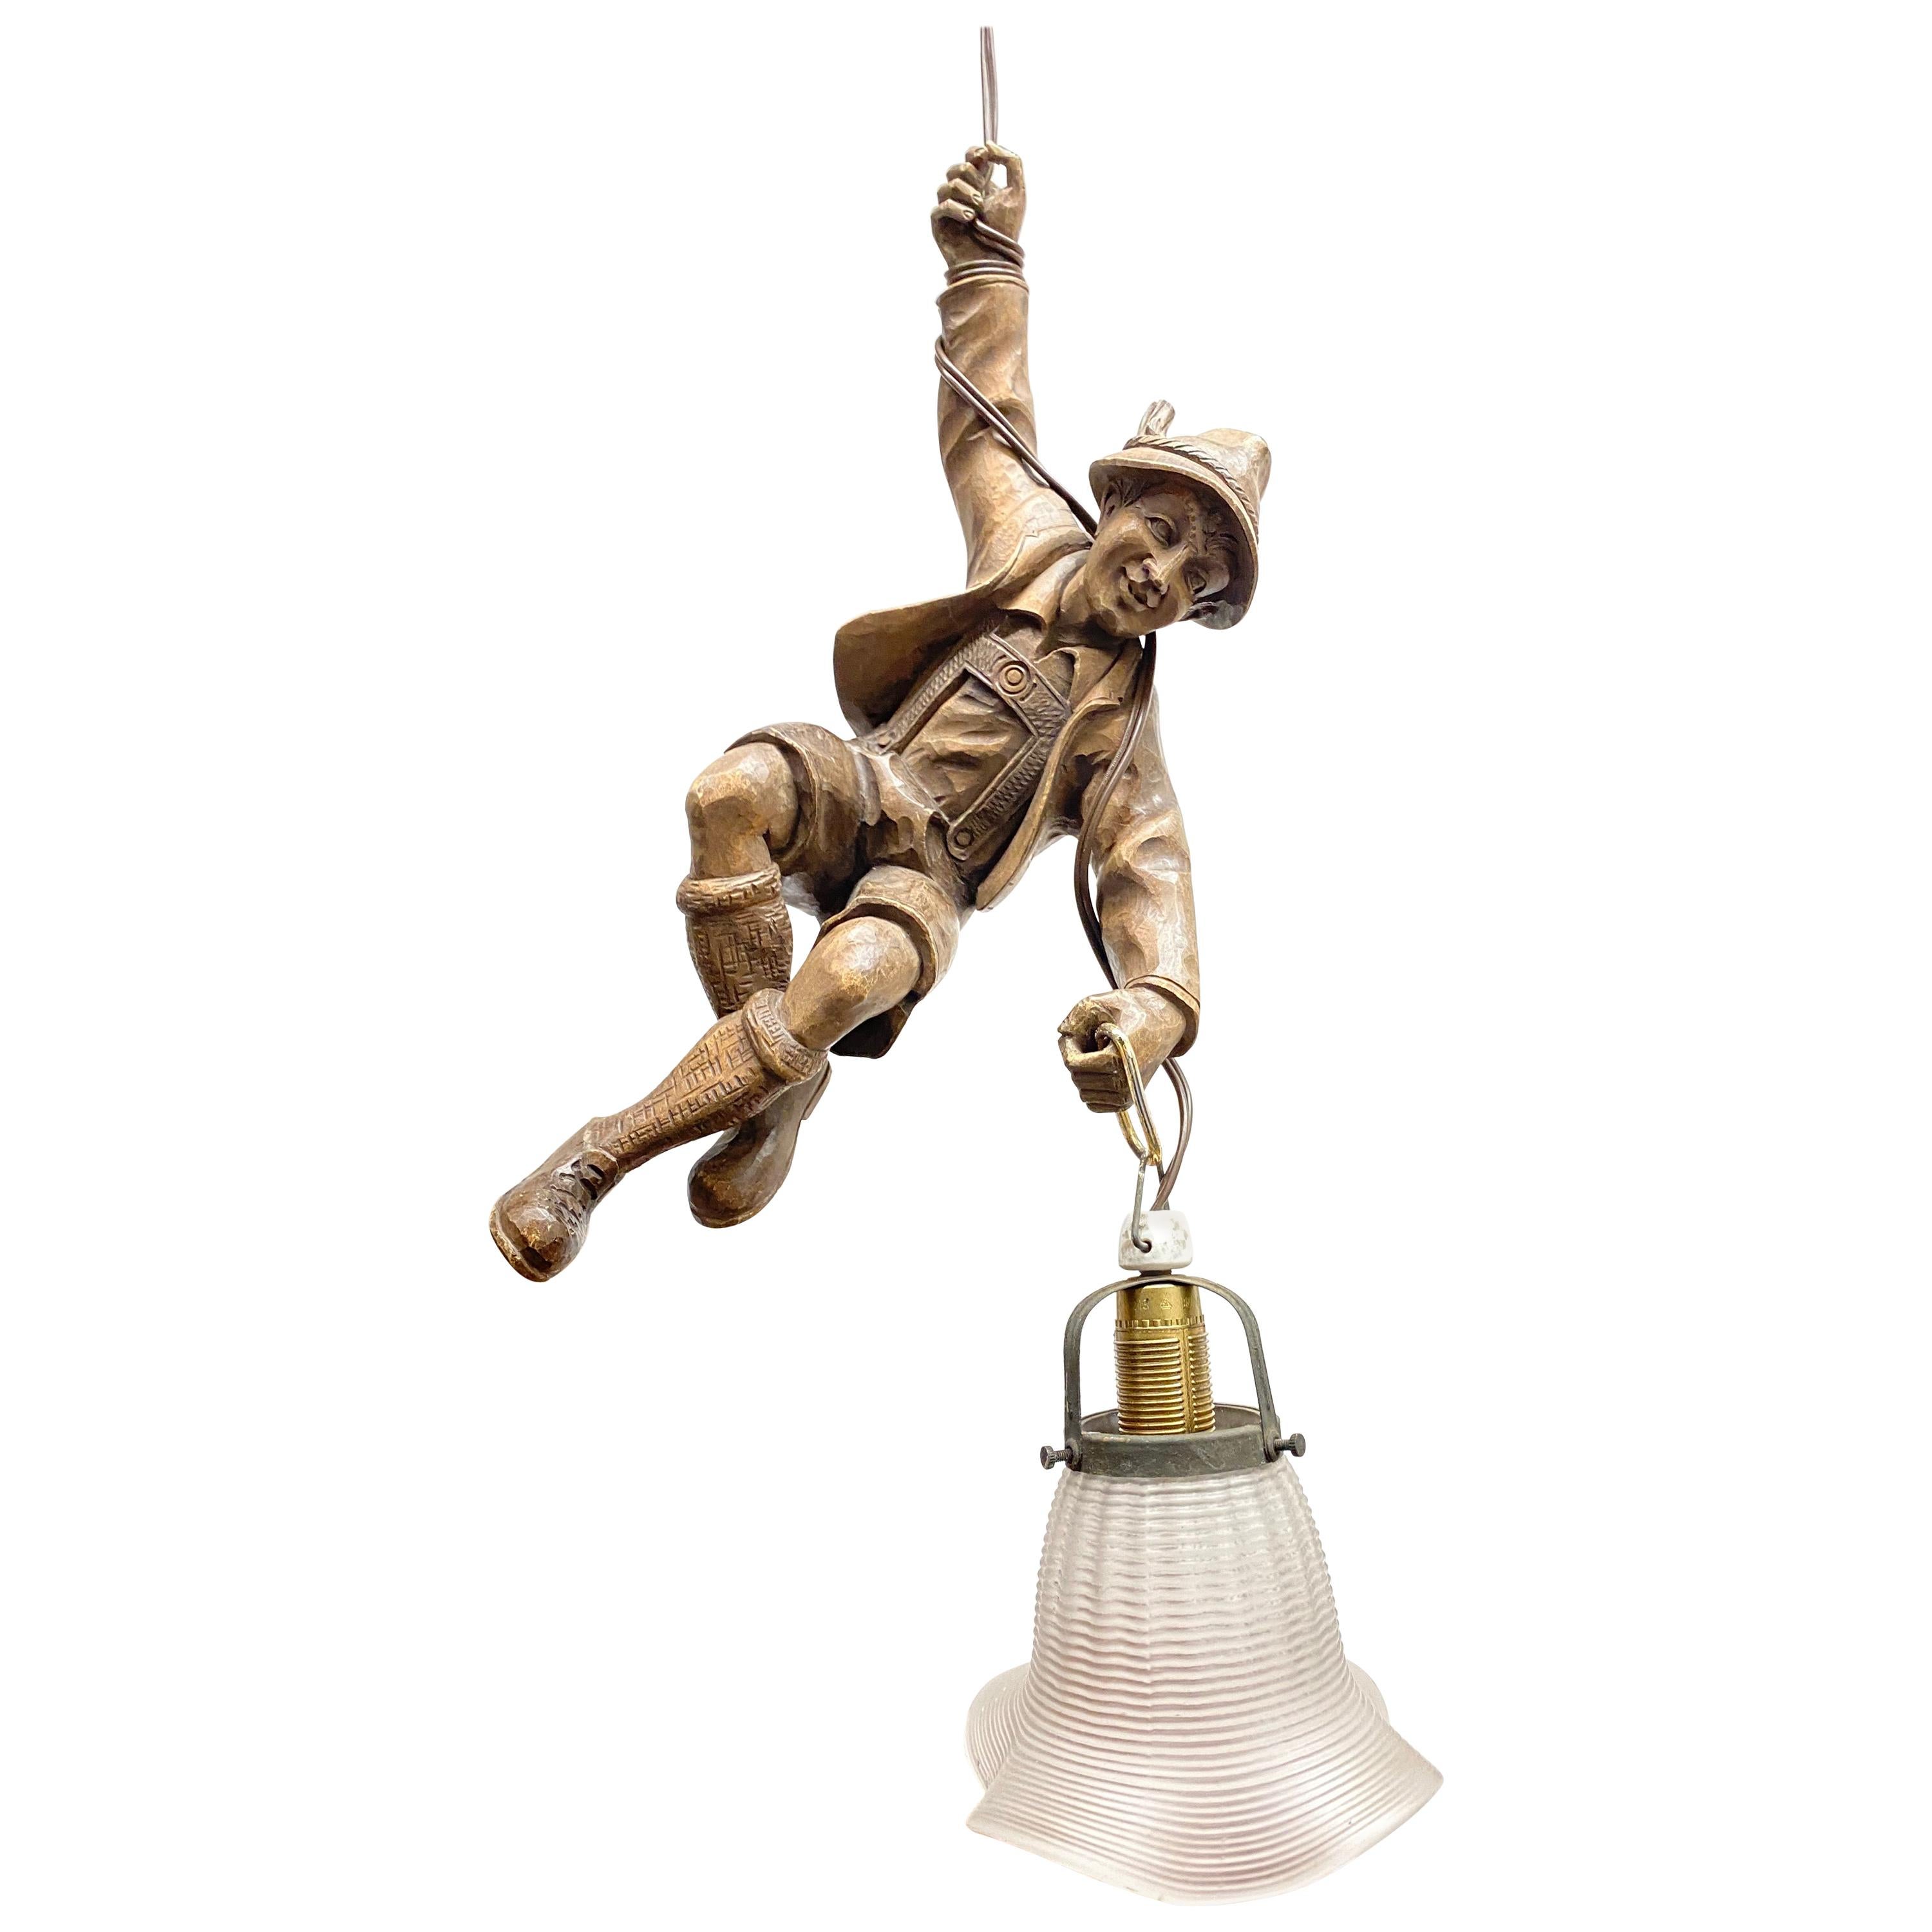 Vintage Hand Carved Mountain Climber or Mountaineer Pendant Light